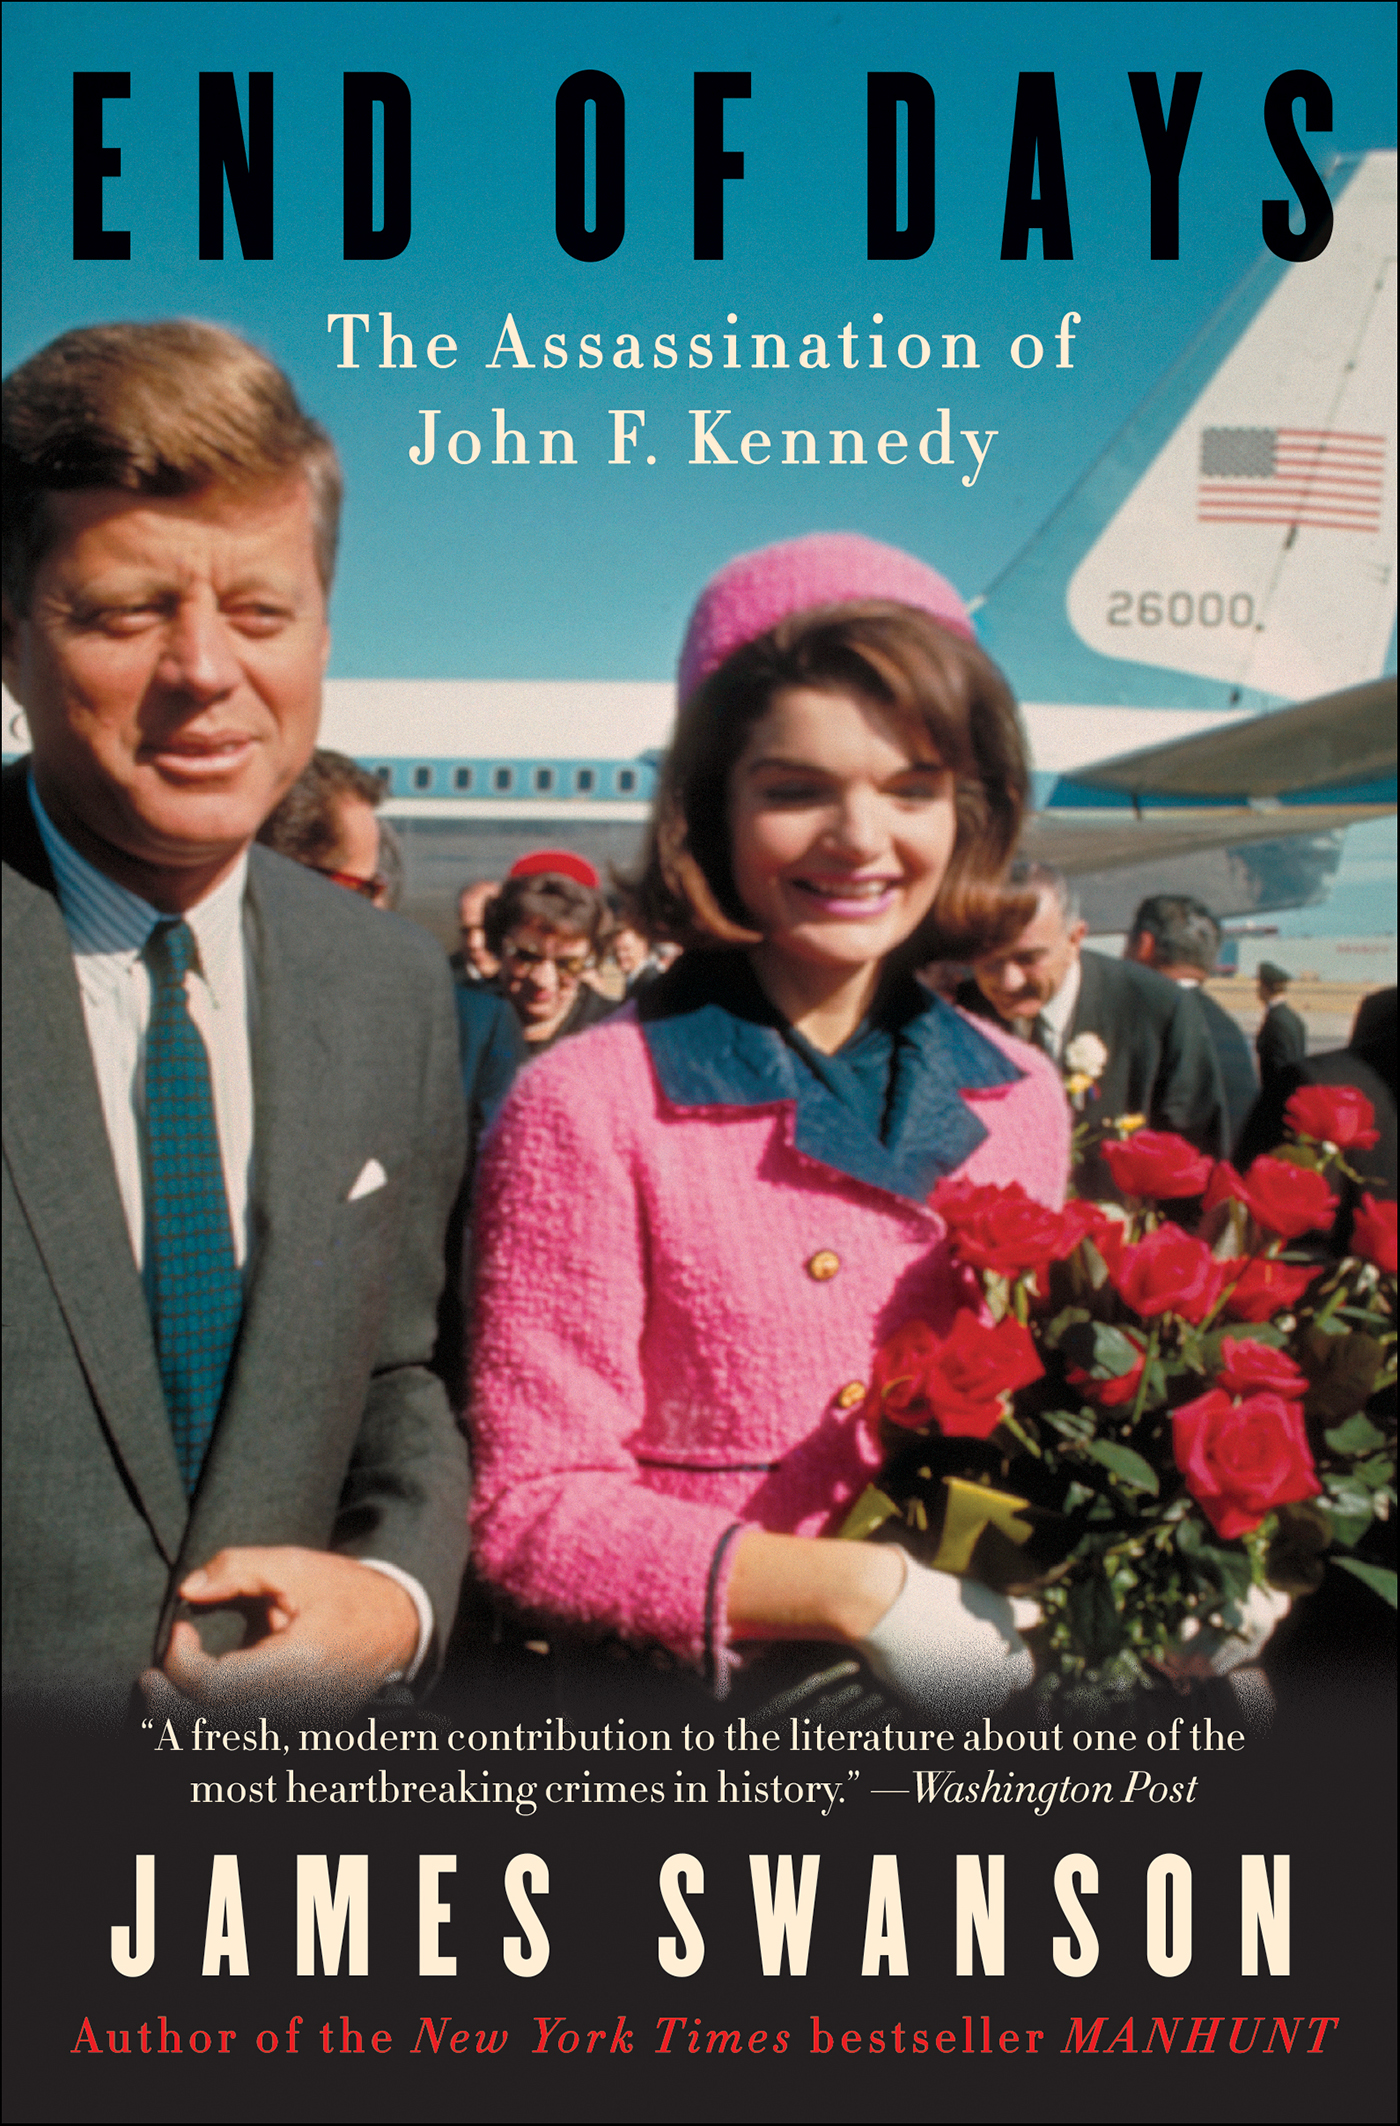 End of days the assassination of John F. Kennedy cover image